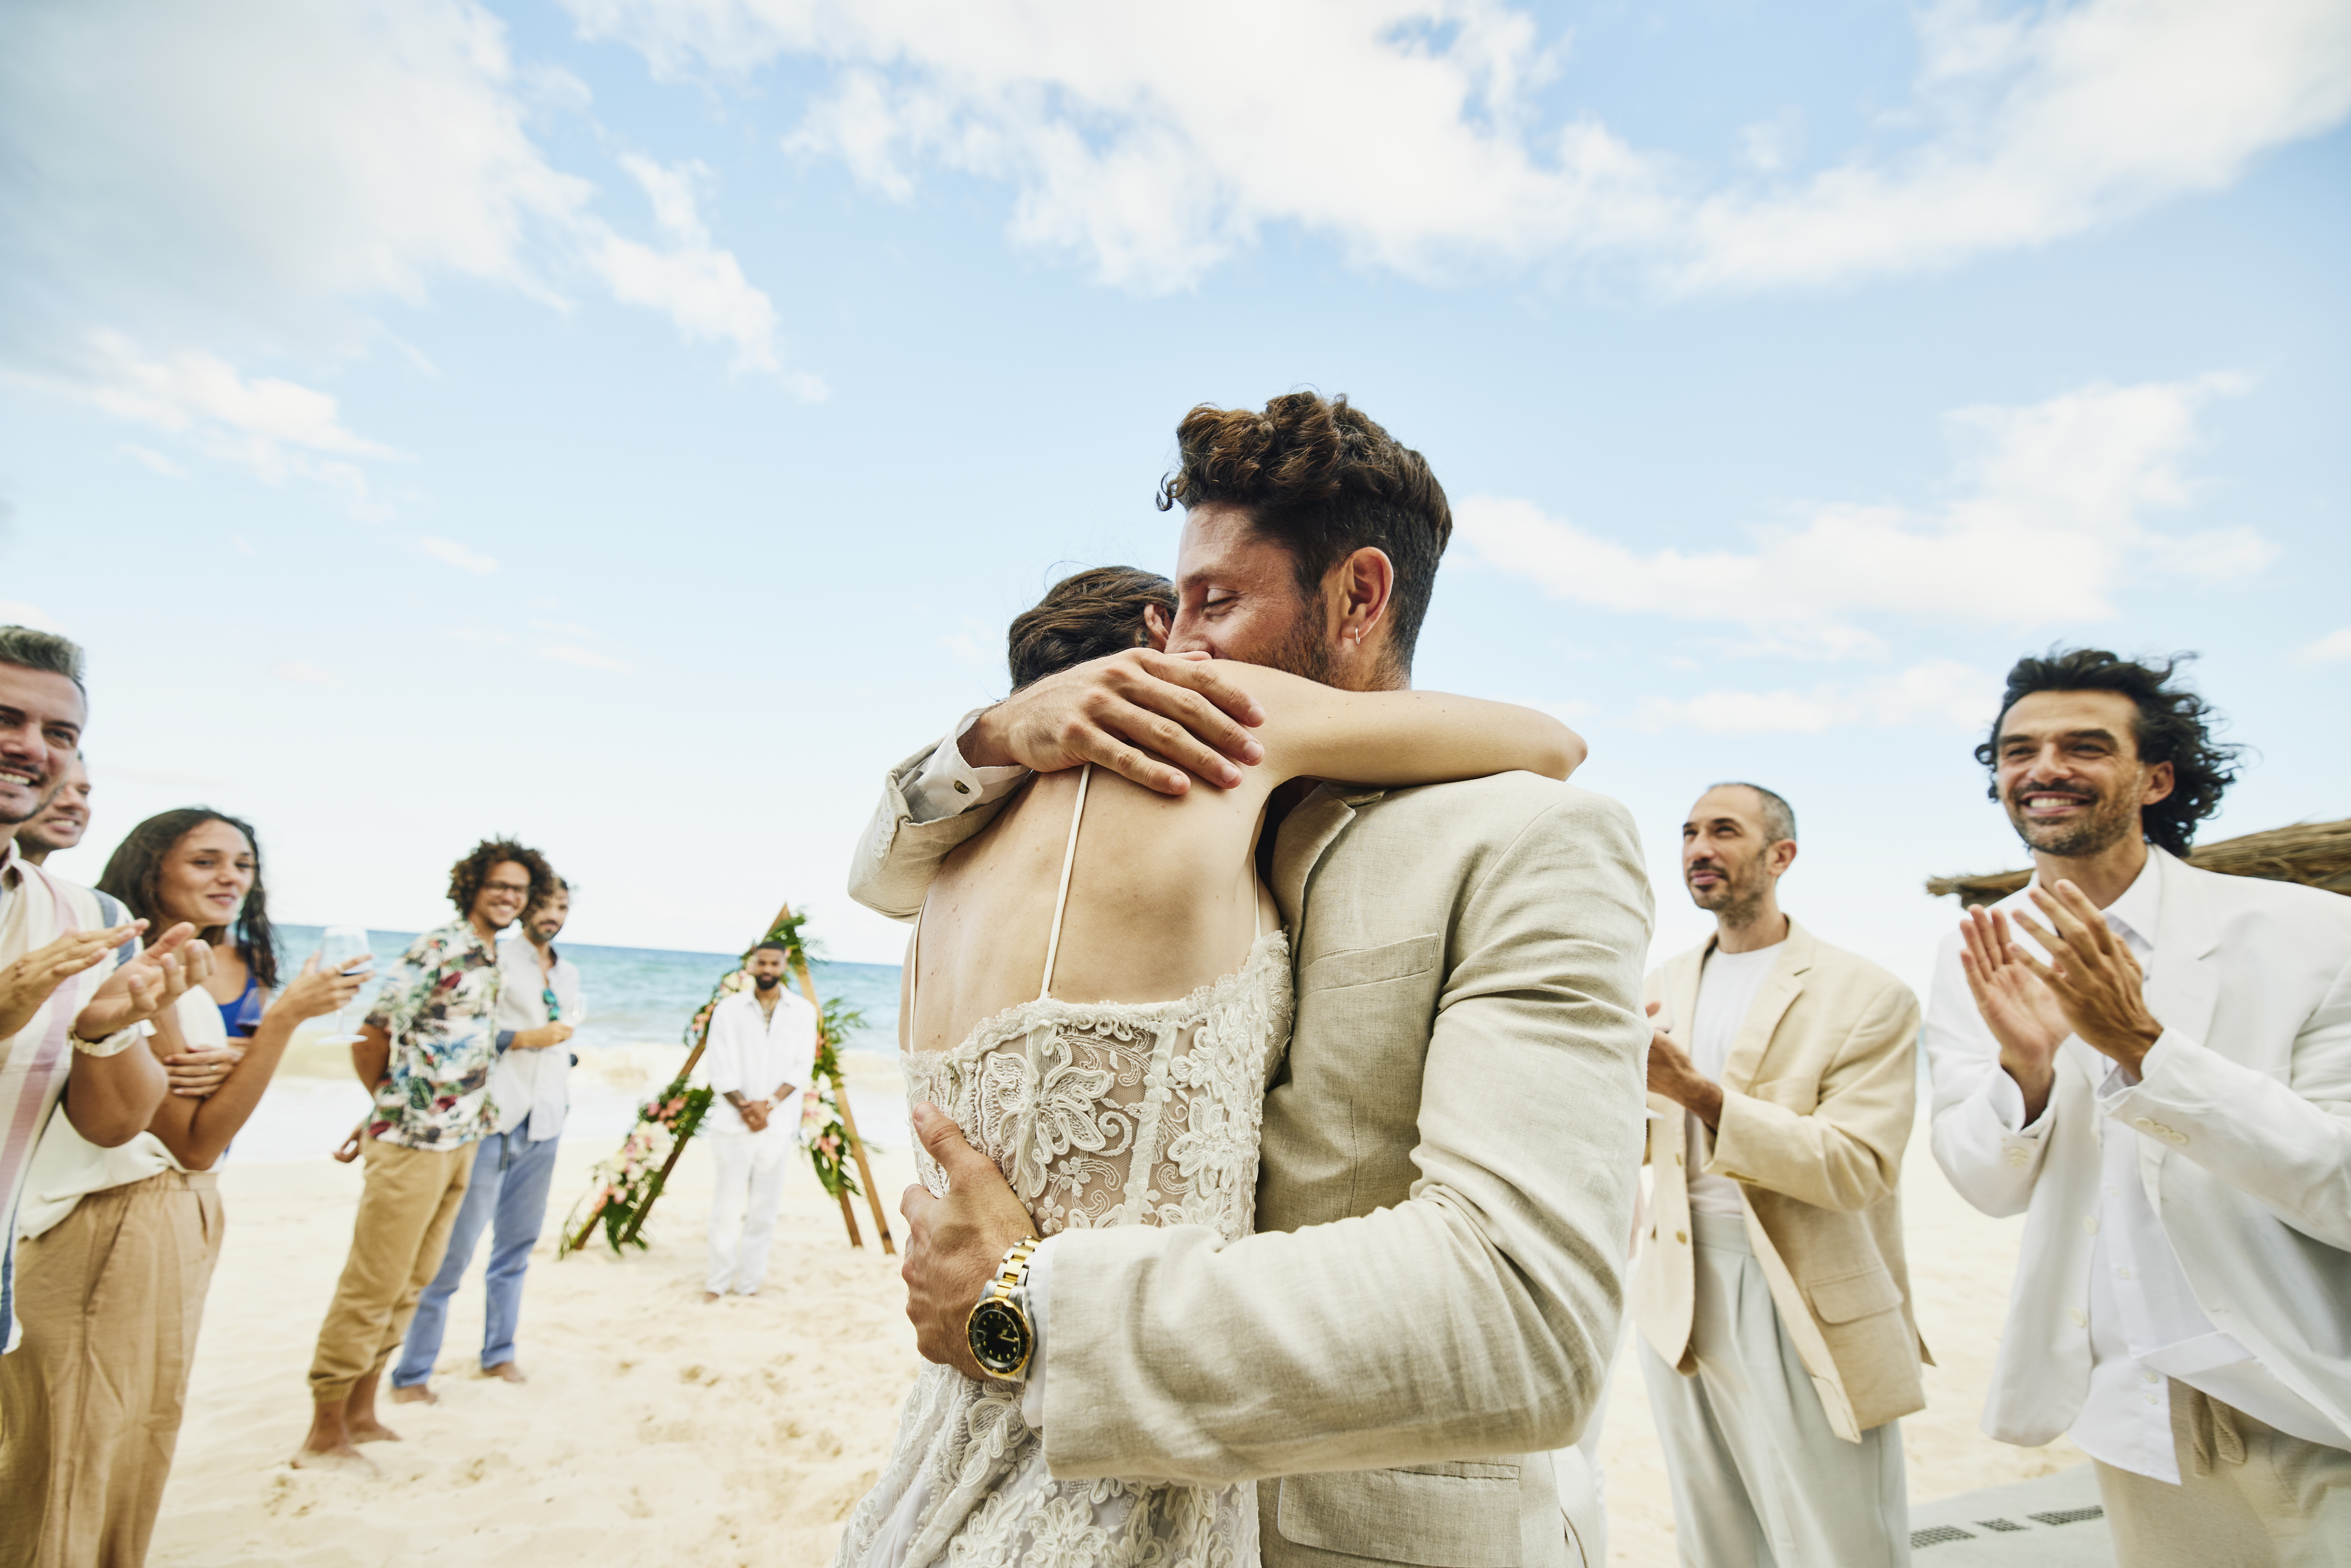 Medium wide shot of bride and groom embracing in front of friends and family celebrating after wedding ceremony on tropical beach | Source: Getty Images